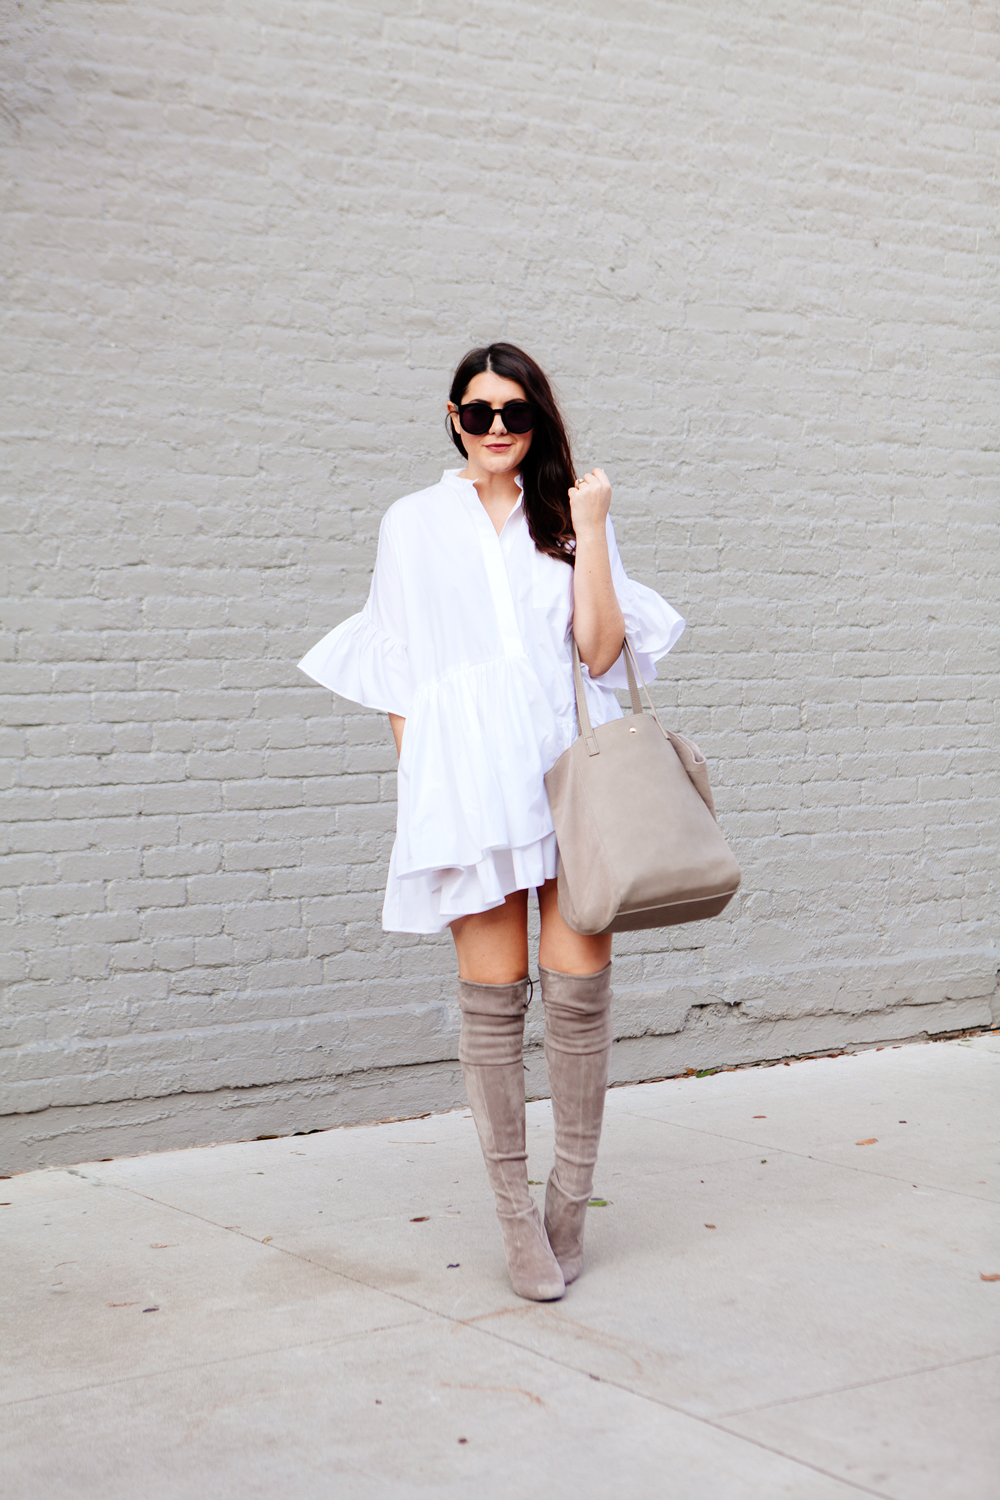 ASOS Layered Frill Hem Oversize Shirt with nude over the knee boots on Kendi Everyday.